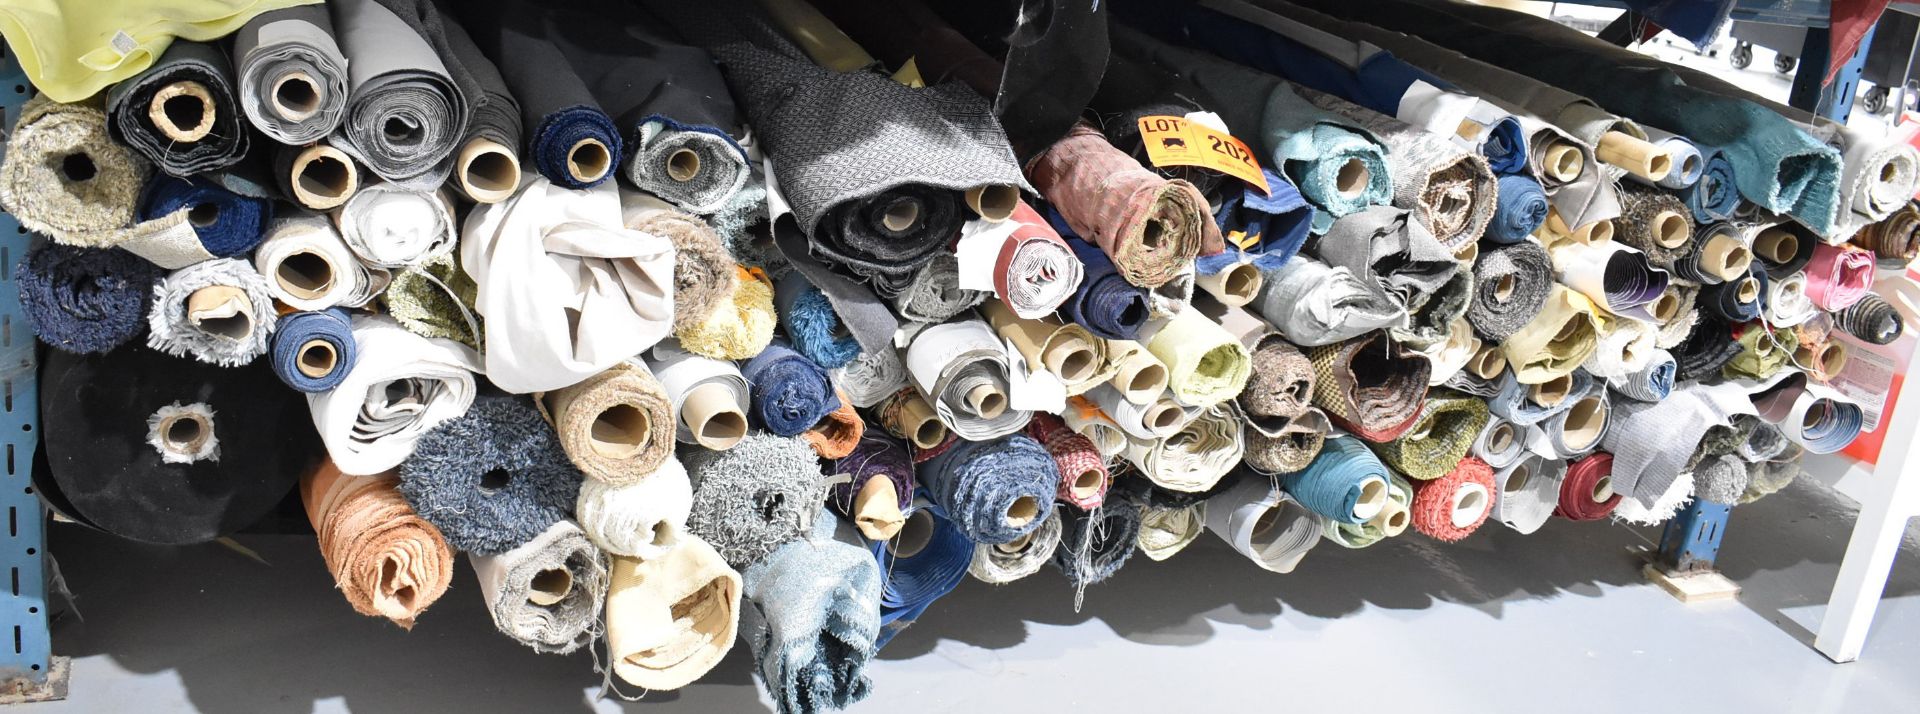 LOT/ CONTENTS OF SHELF CONSISTING OF FABRIC ROLLS